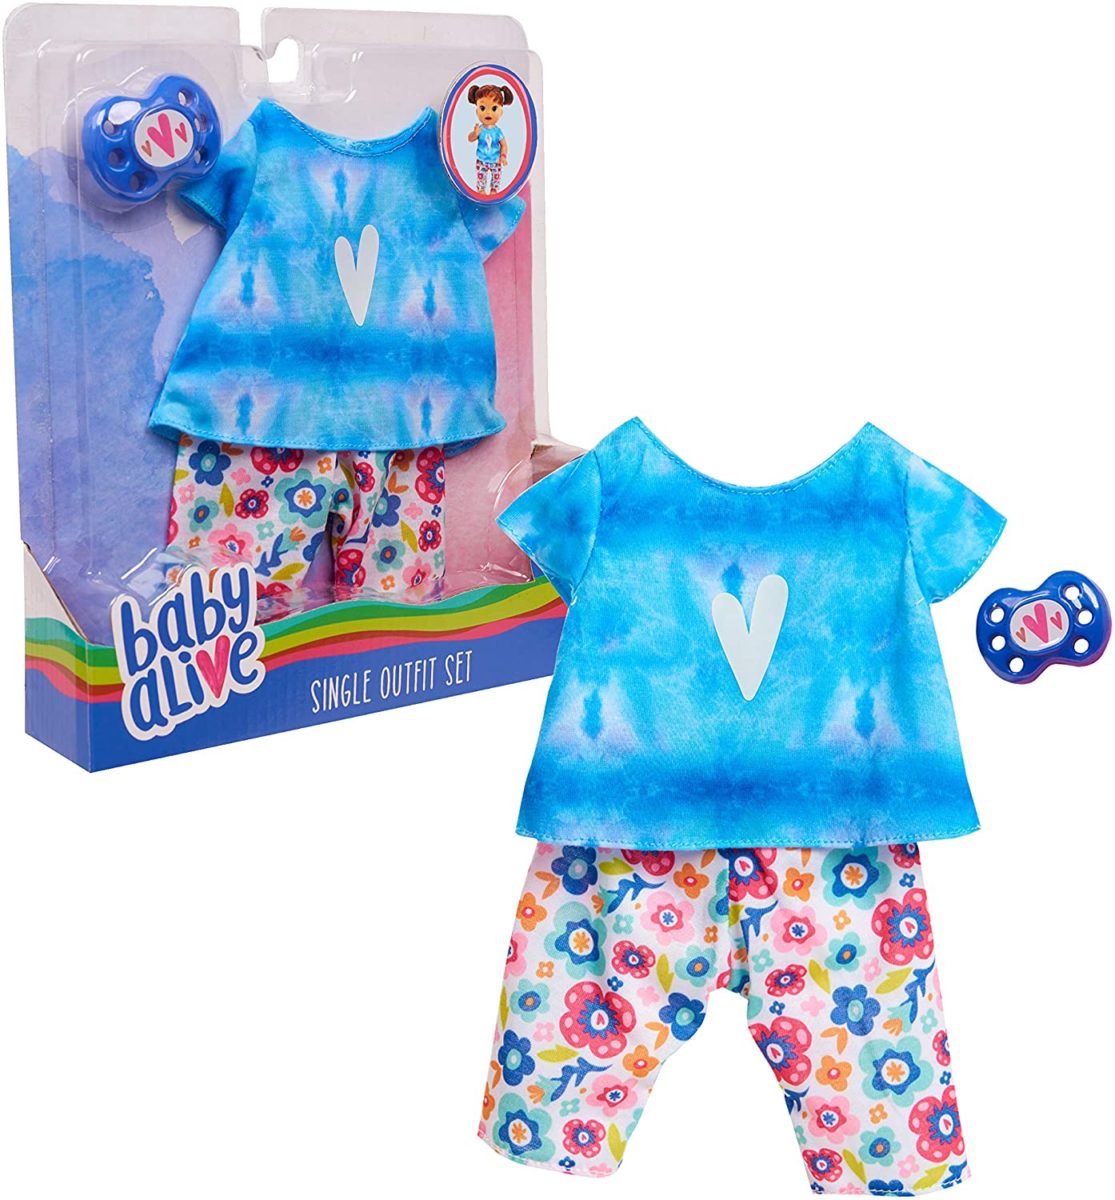 Baby Alive Clothes That Your Kid Will Love